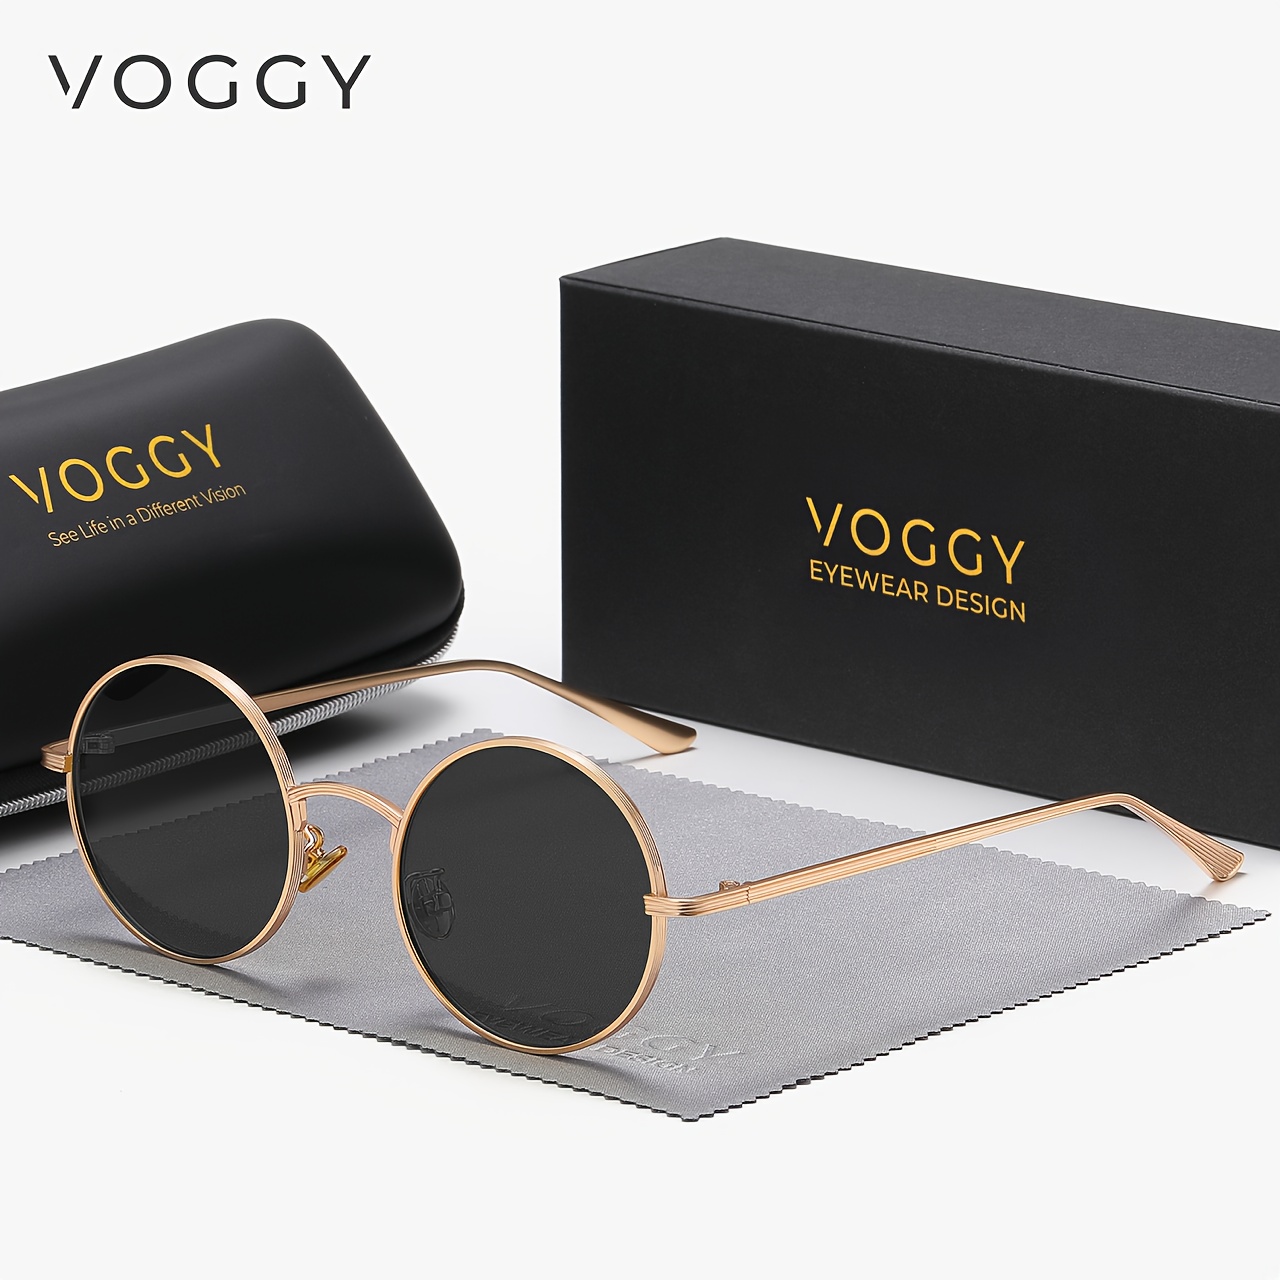 

Polarized Round Sunglasses For Women Men Vintage Fashion Metal Frame Sun Shades For Driving Beach Party With Gifts Box Mother's Day/give Gifts